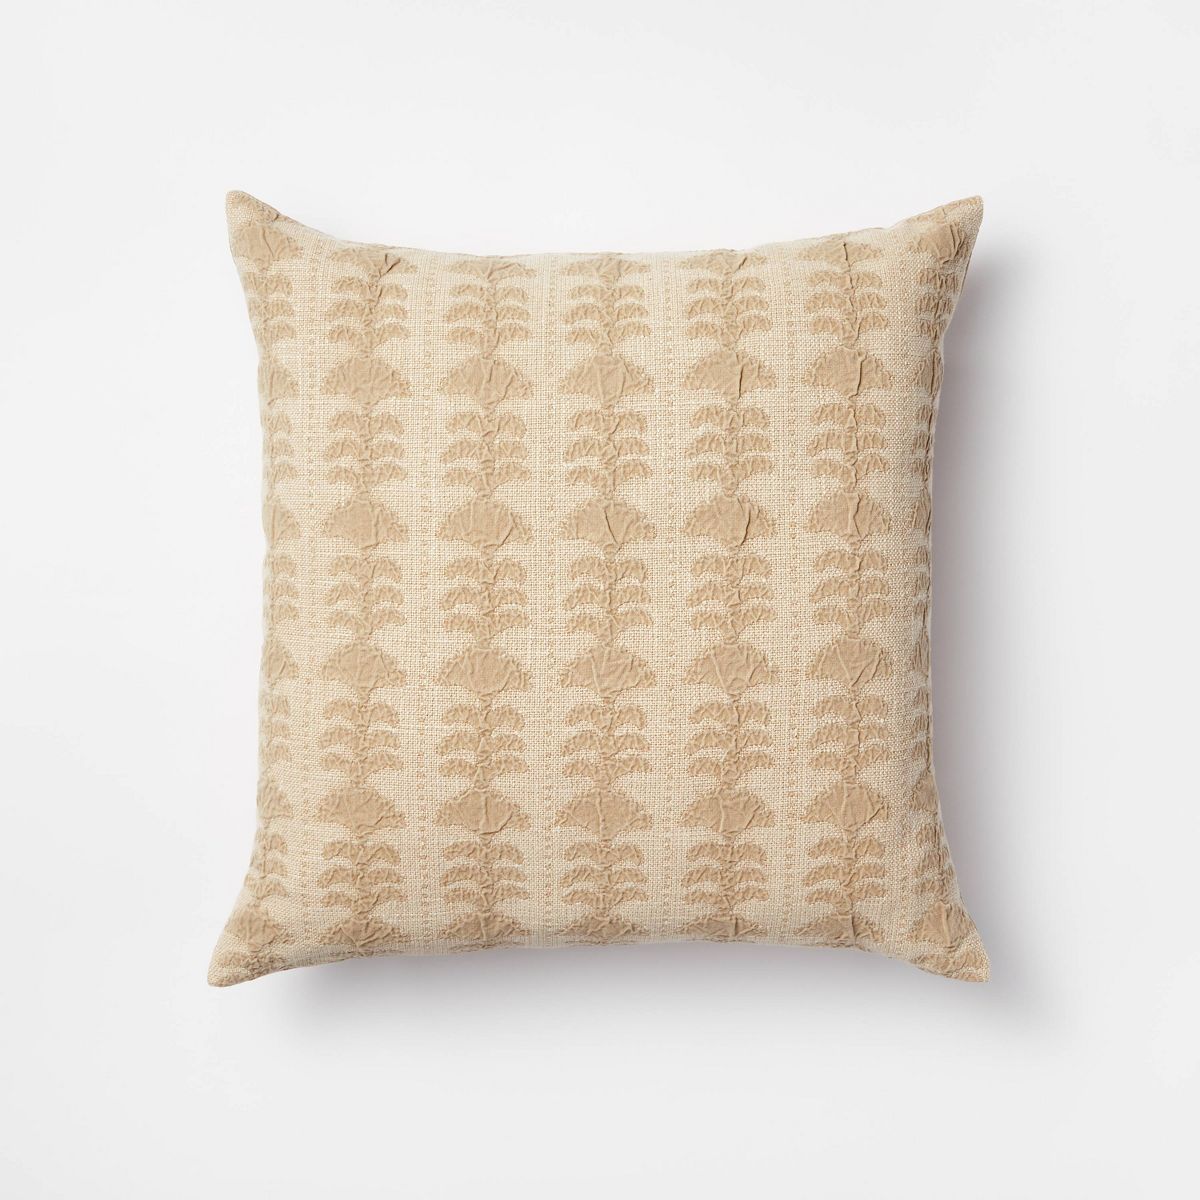 Woven Block Print Square Throw Pillow with Tassels - Threshold™ designed with Studio McGee | Target